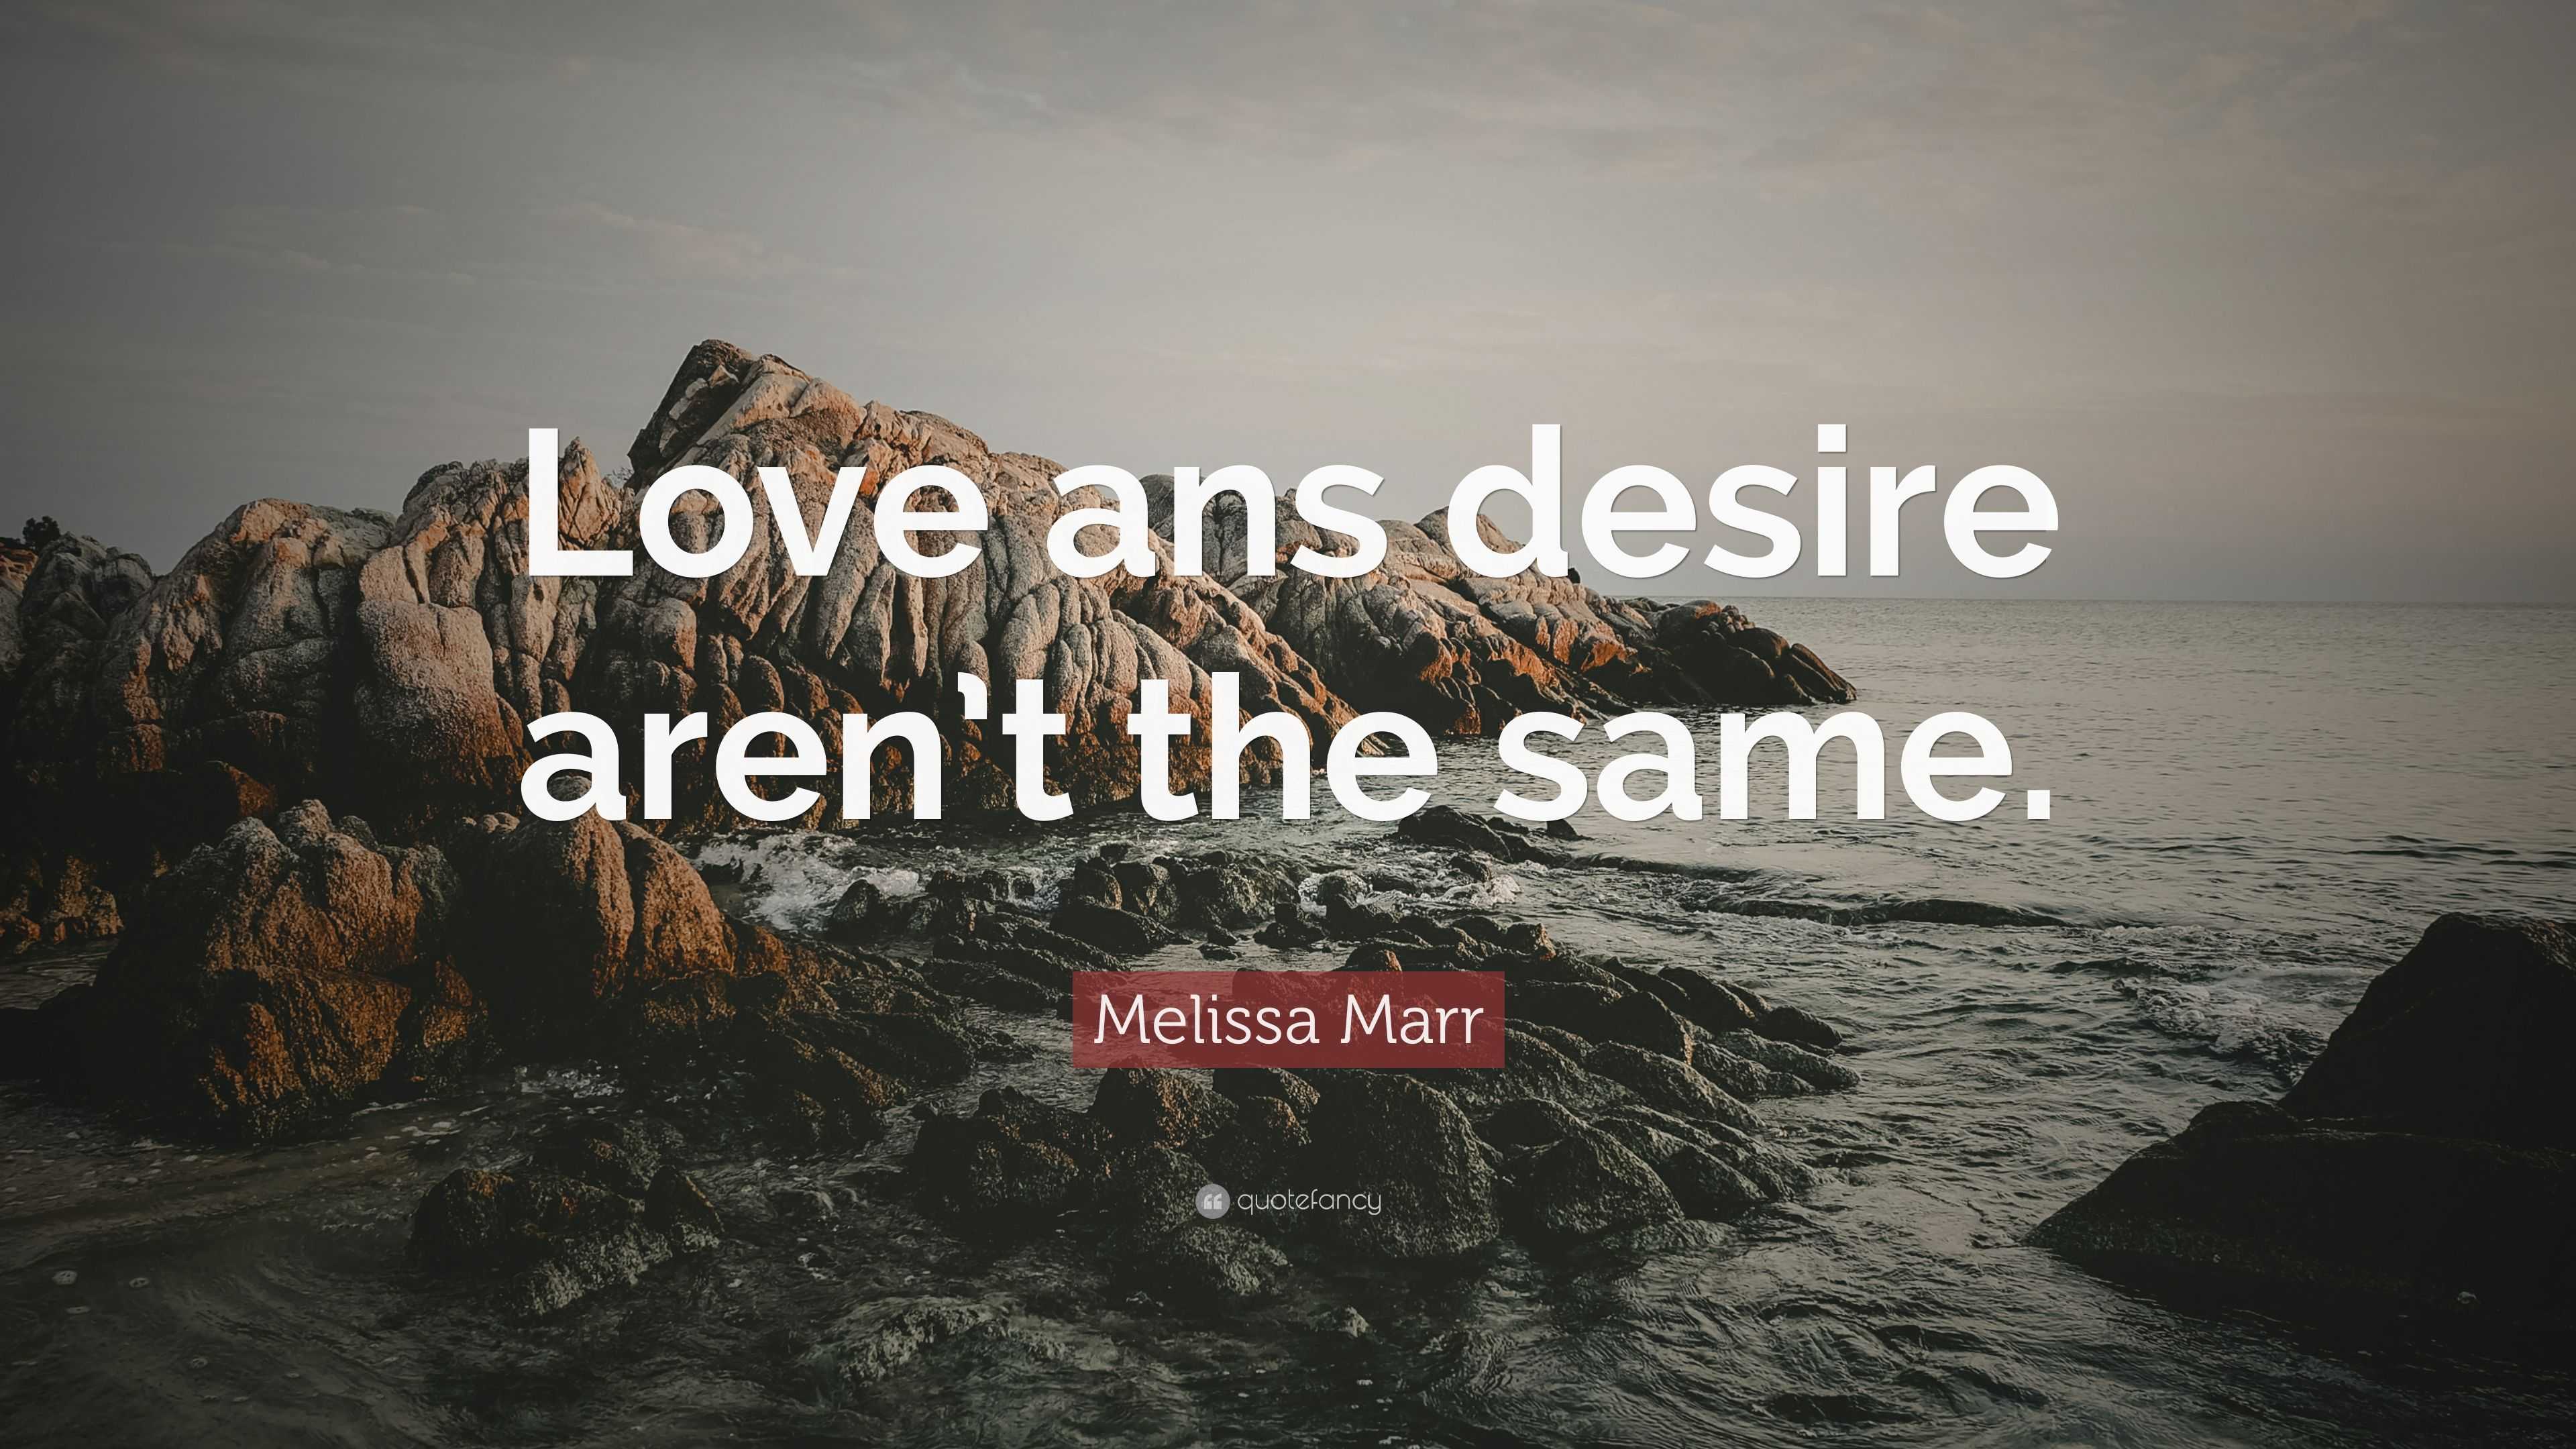 Melissa Marr Quote: “Love ans desire aren’t the same.”